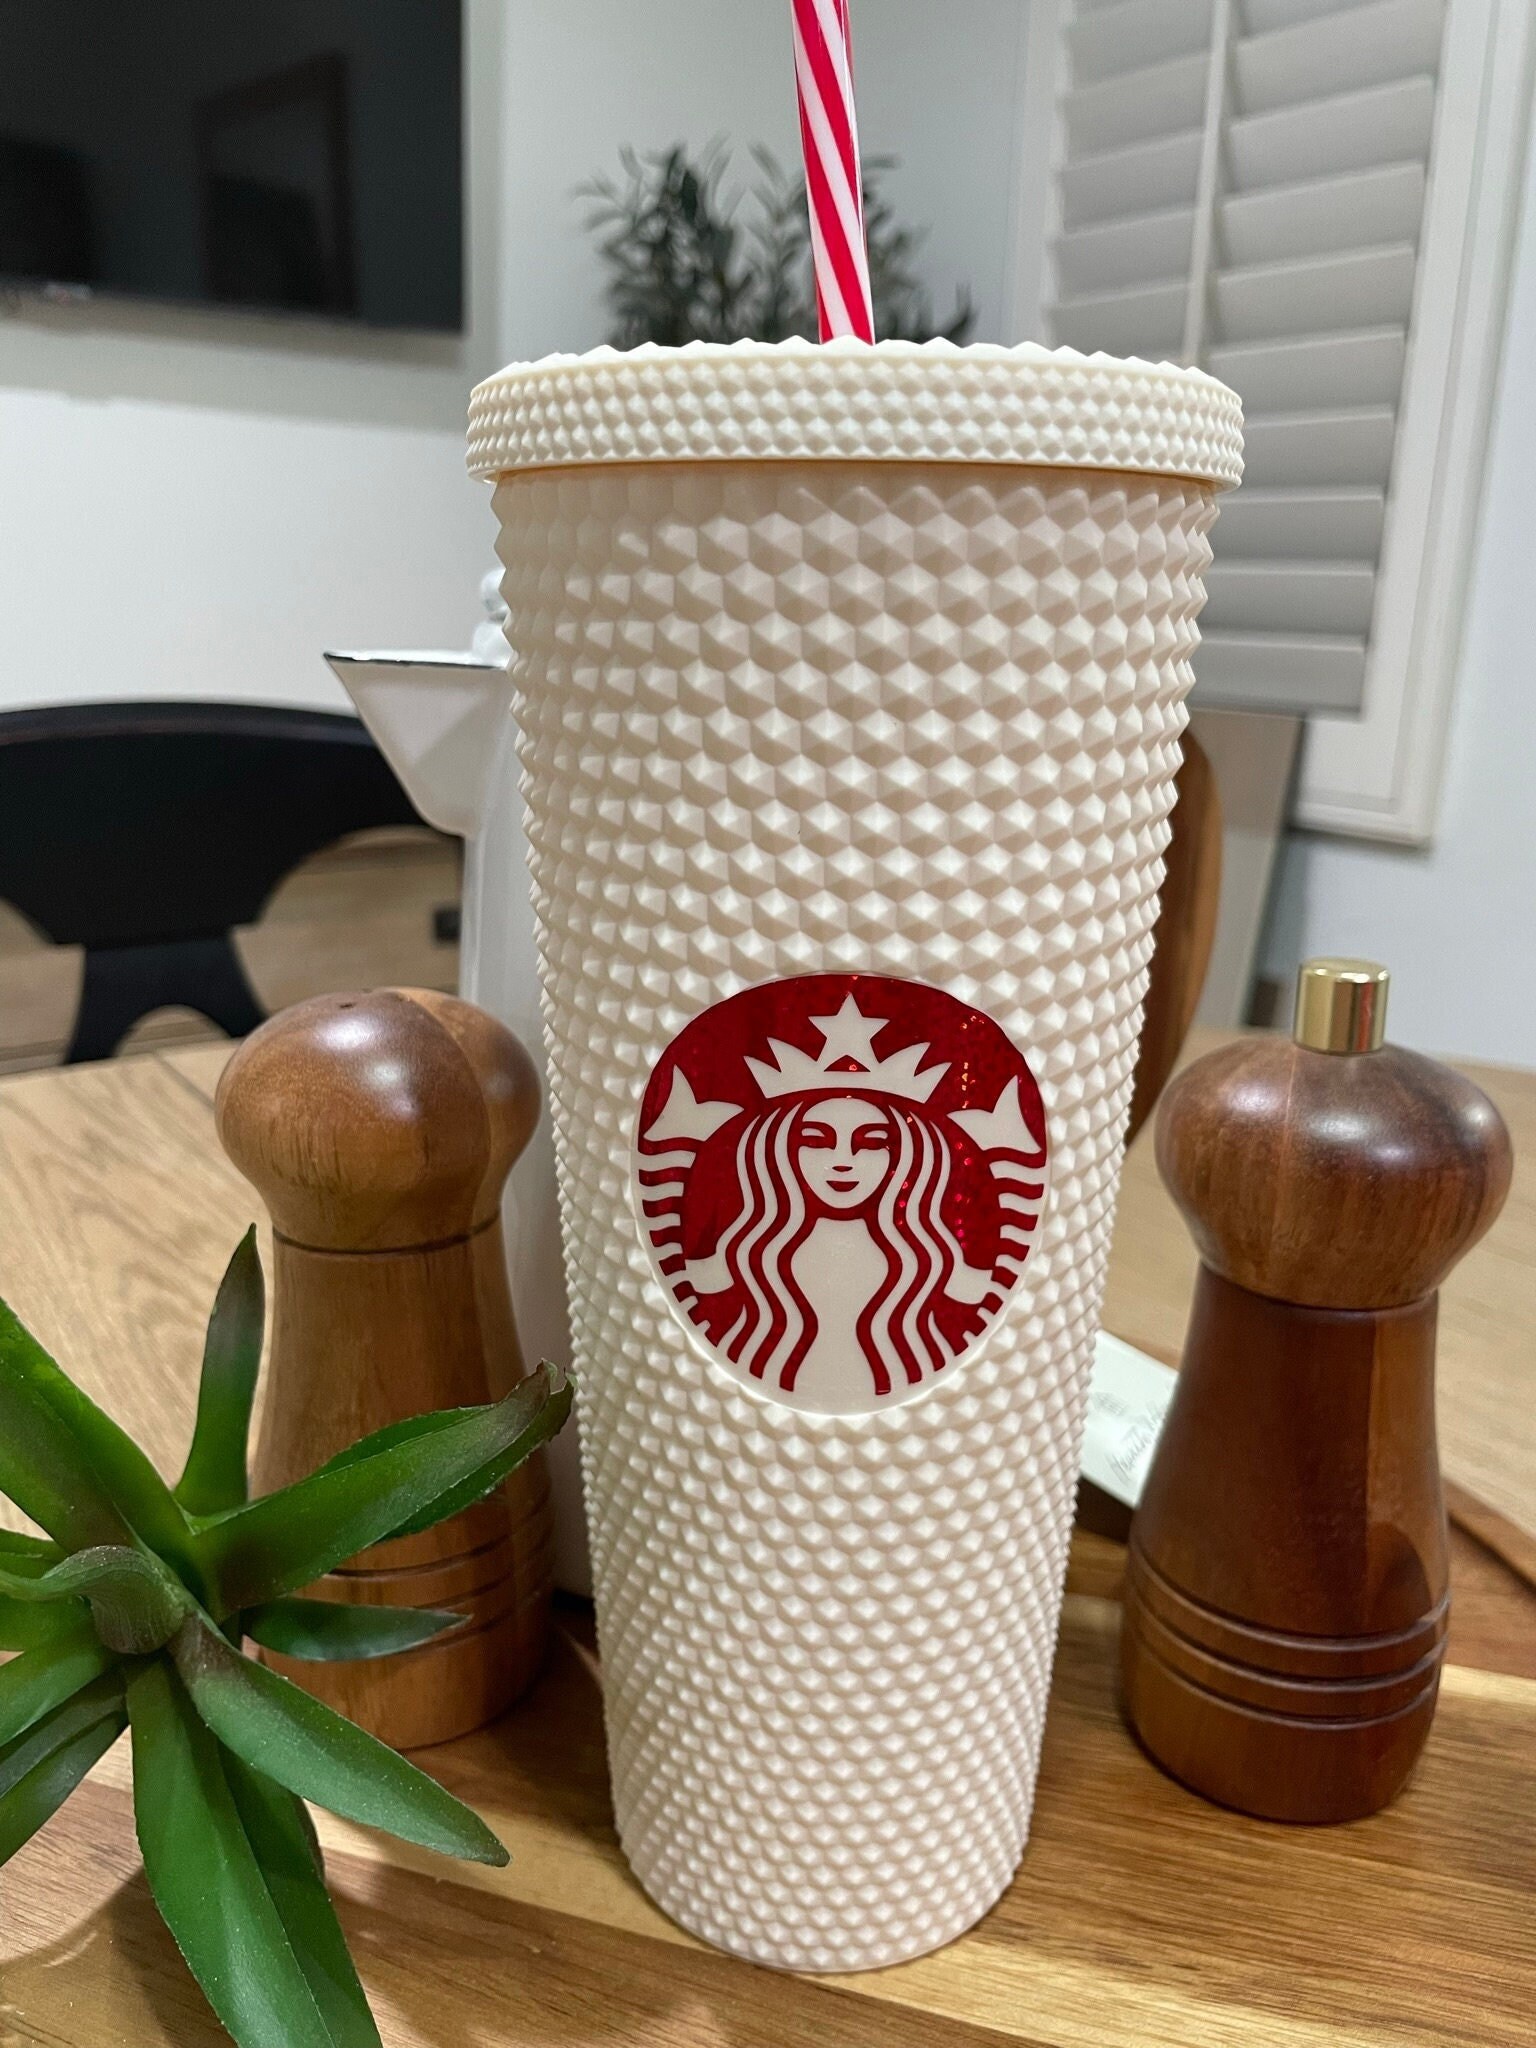 Matte Studded Double Wall Water Tumbler with Straw and Leak Proof